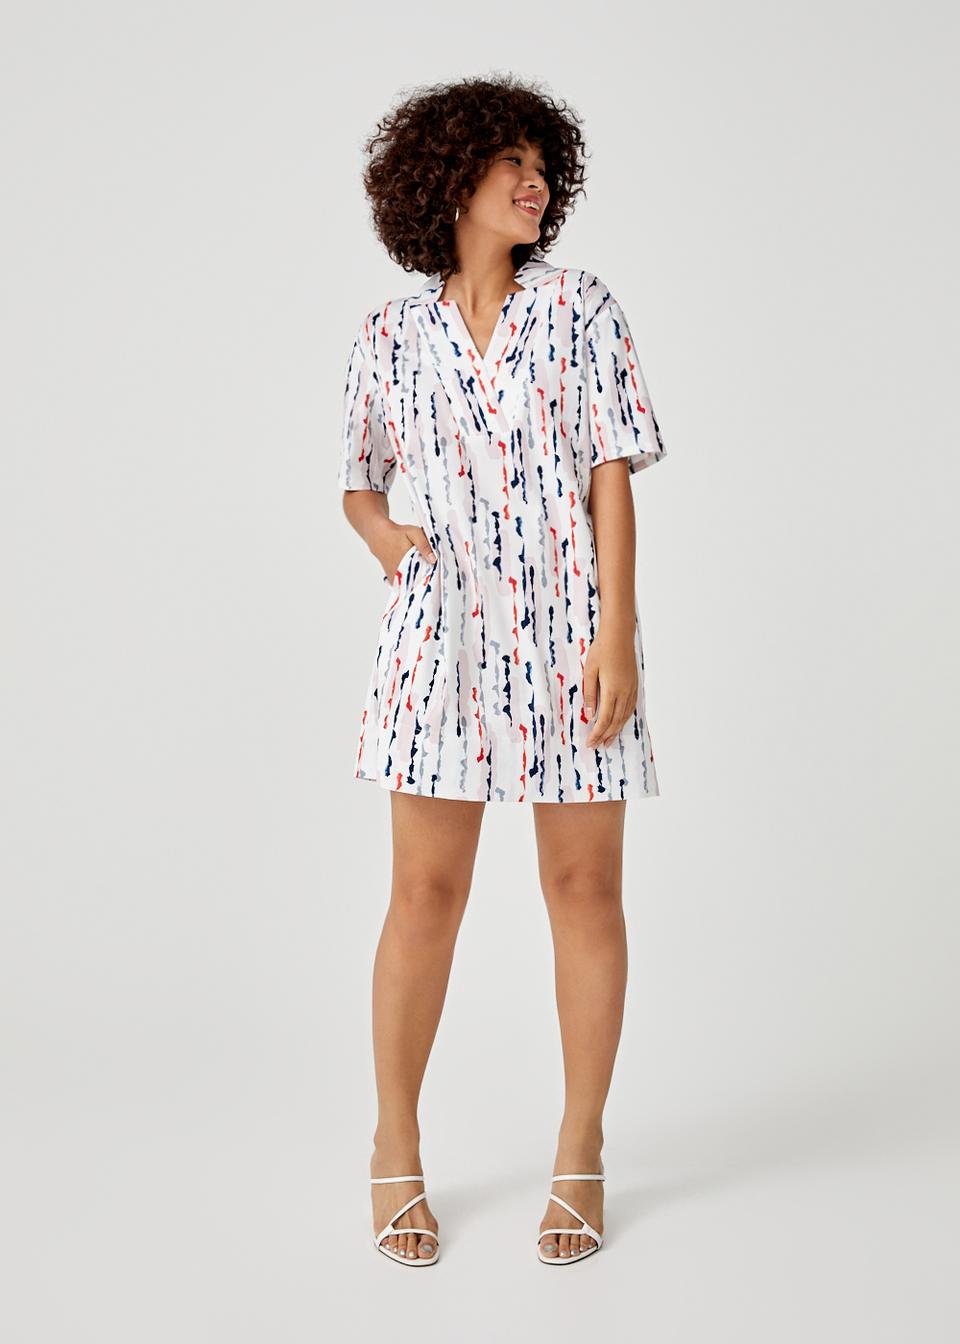 Liana Shift Dress in Afternoon Drizzle